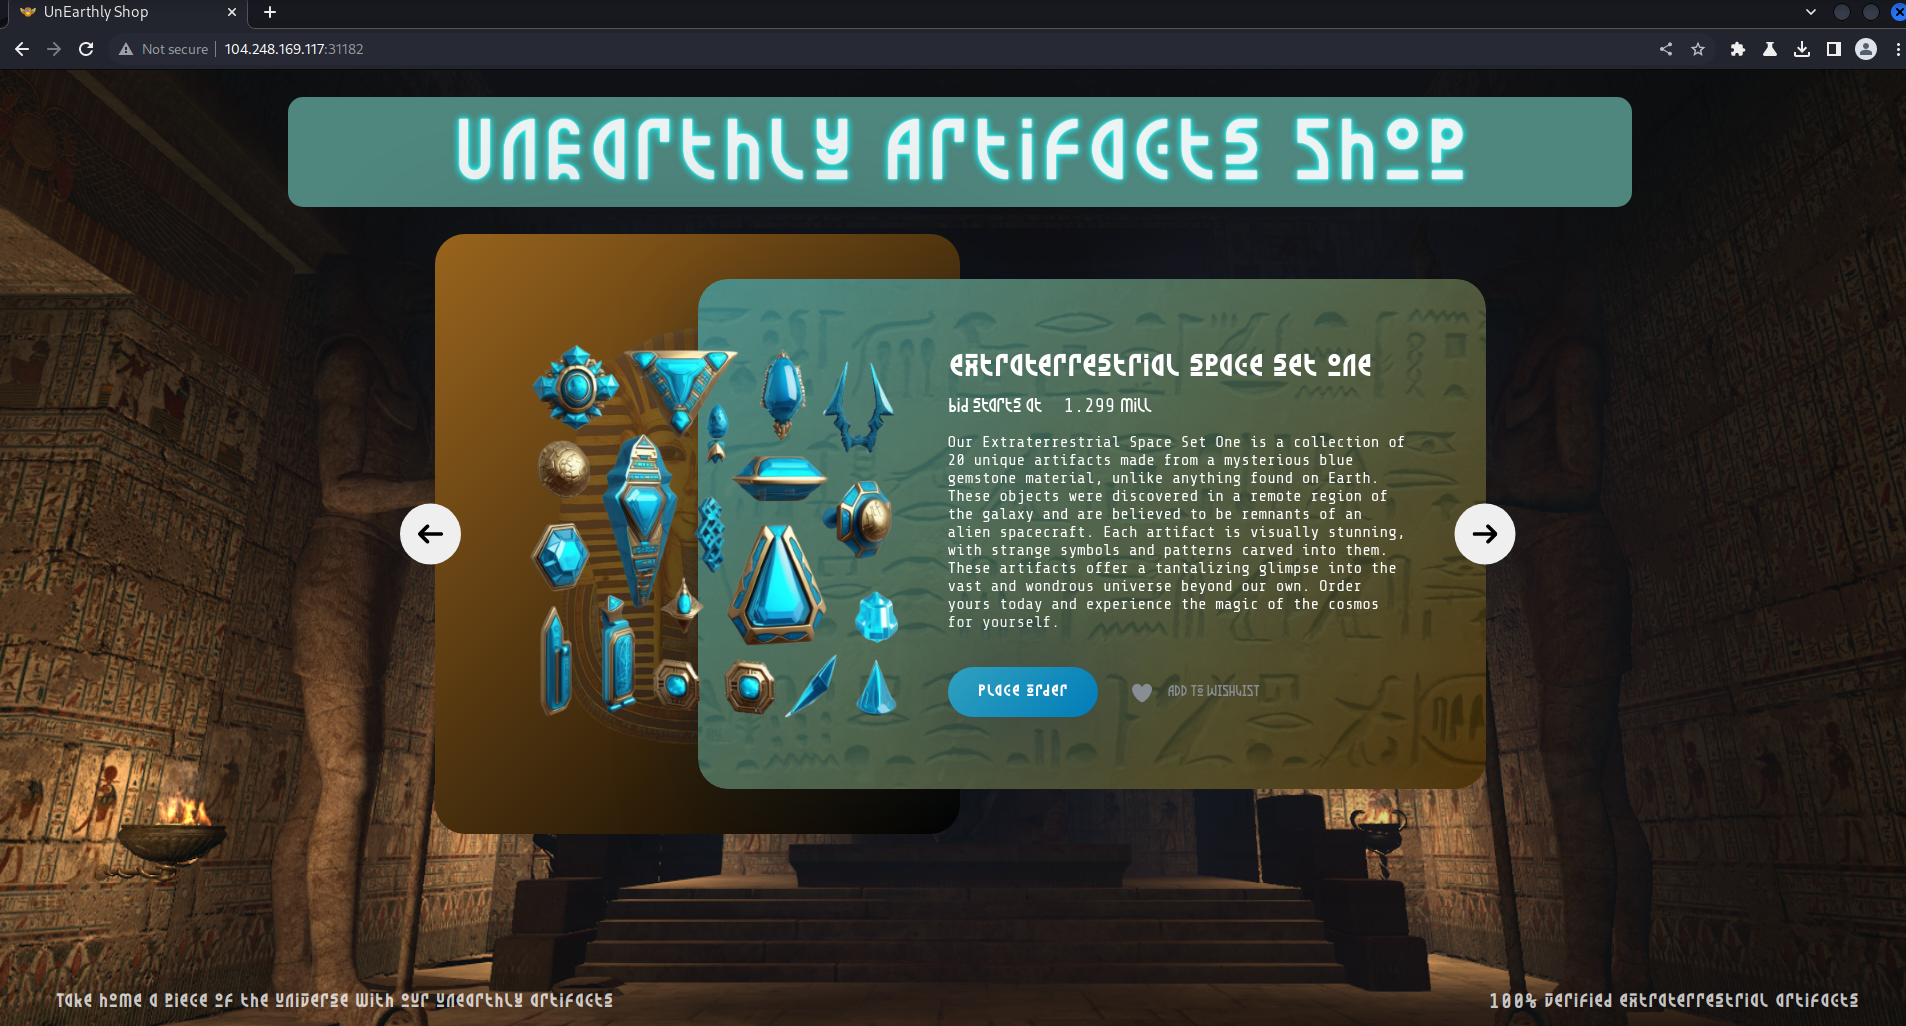 Target website opened in Burp Browser displayed an “UnEarthly Artifacts Shop”